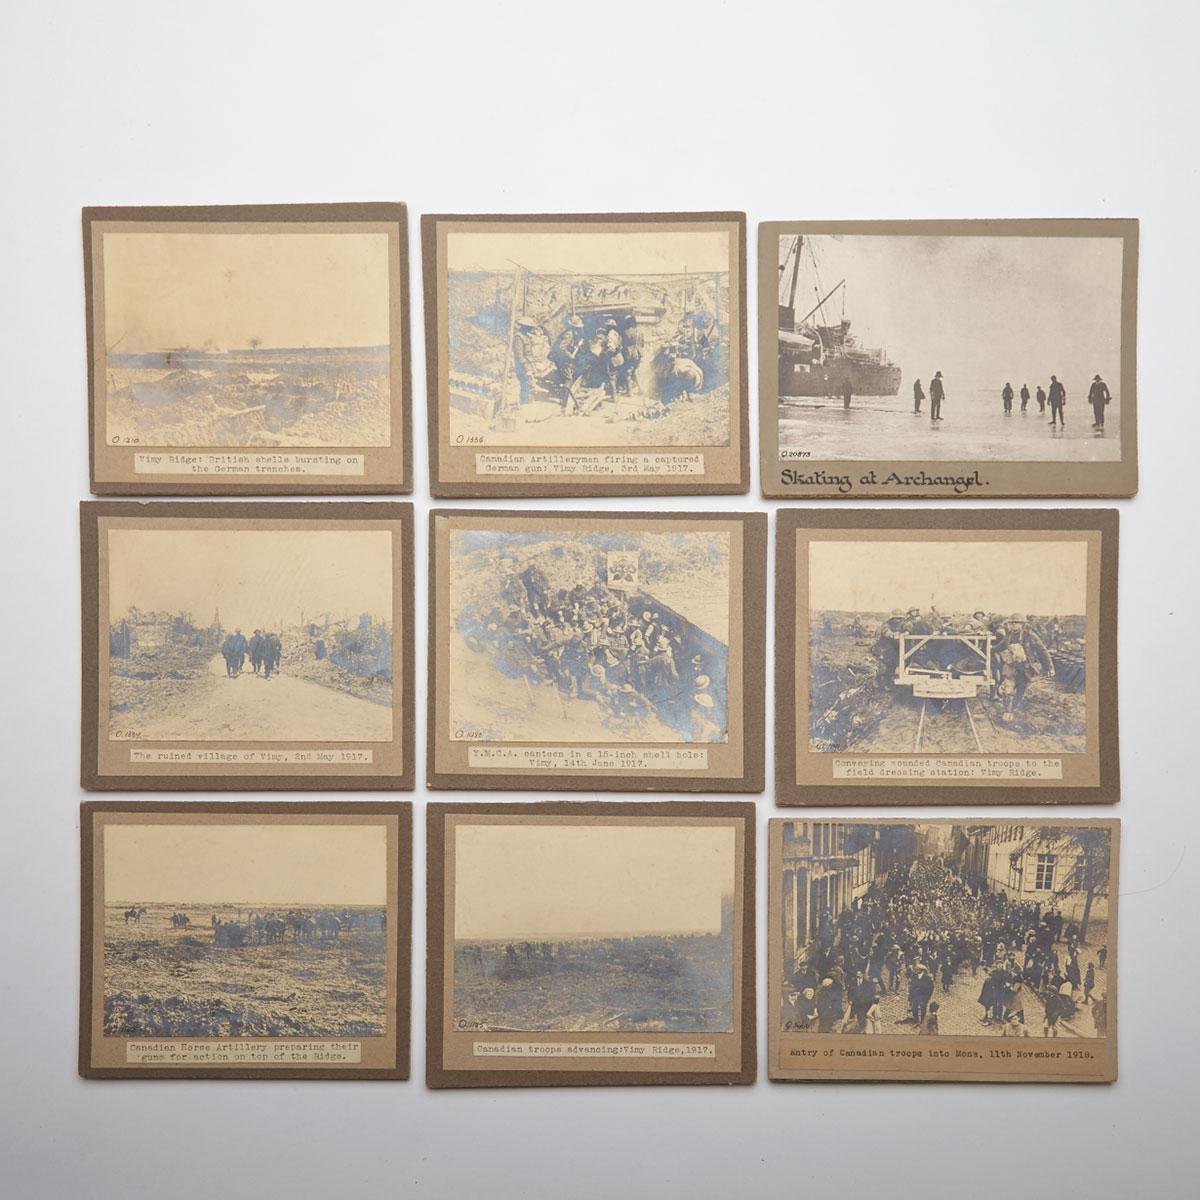 Group of  Nine SIlver Albumin Print Photographs Relating to WWI,  Canadian Forces and Vimy Ridge, 1917-18